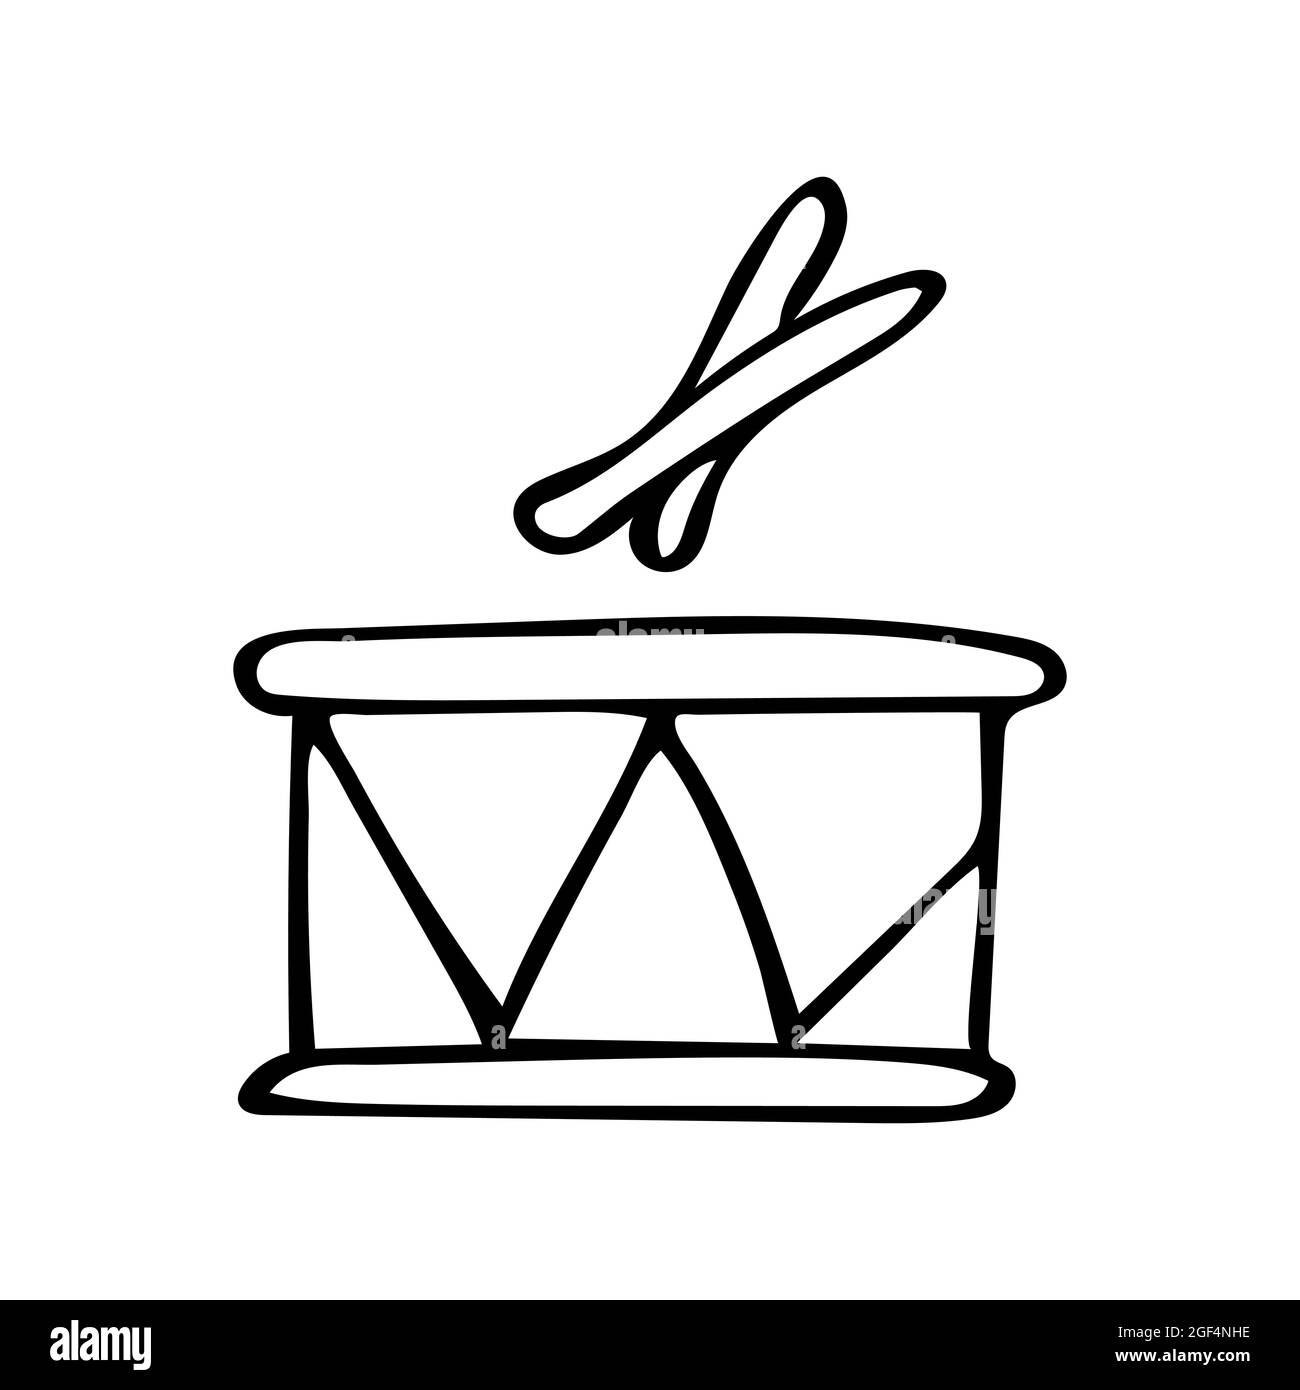 Drum vector illustration. Hand drawn icon and symbol for print. Stock Vector